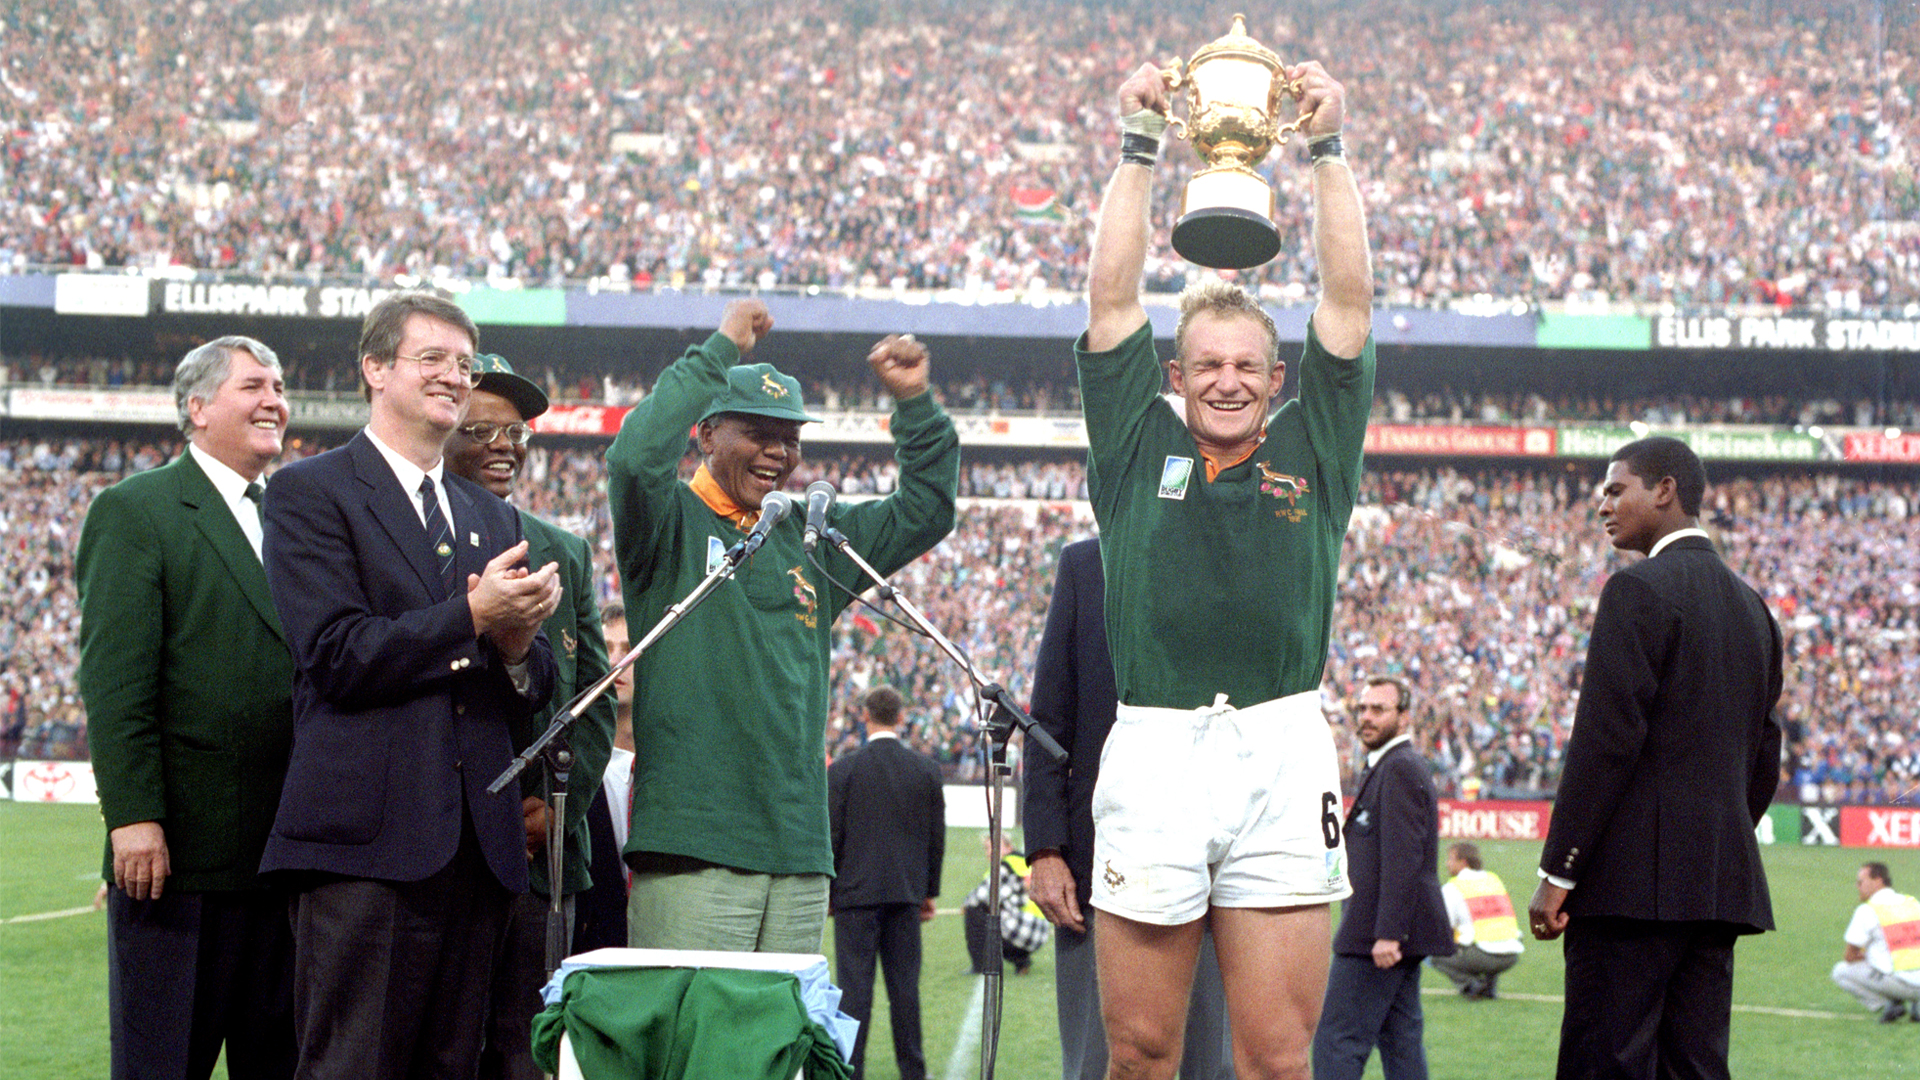 <p>South Africa hosts and wins both the 1995 Rugby World Cup and the 1996 Africa Cup of Nations. Both events are hailed as victories for national reconciliation under the Mandela administration.</p>